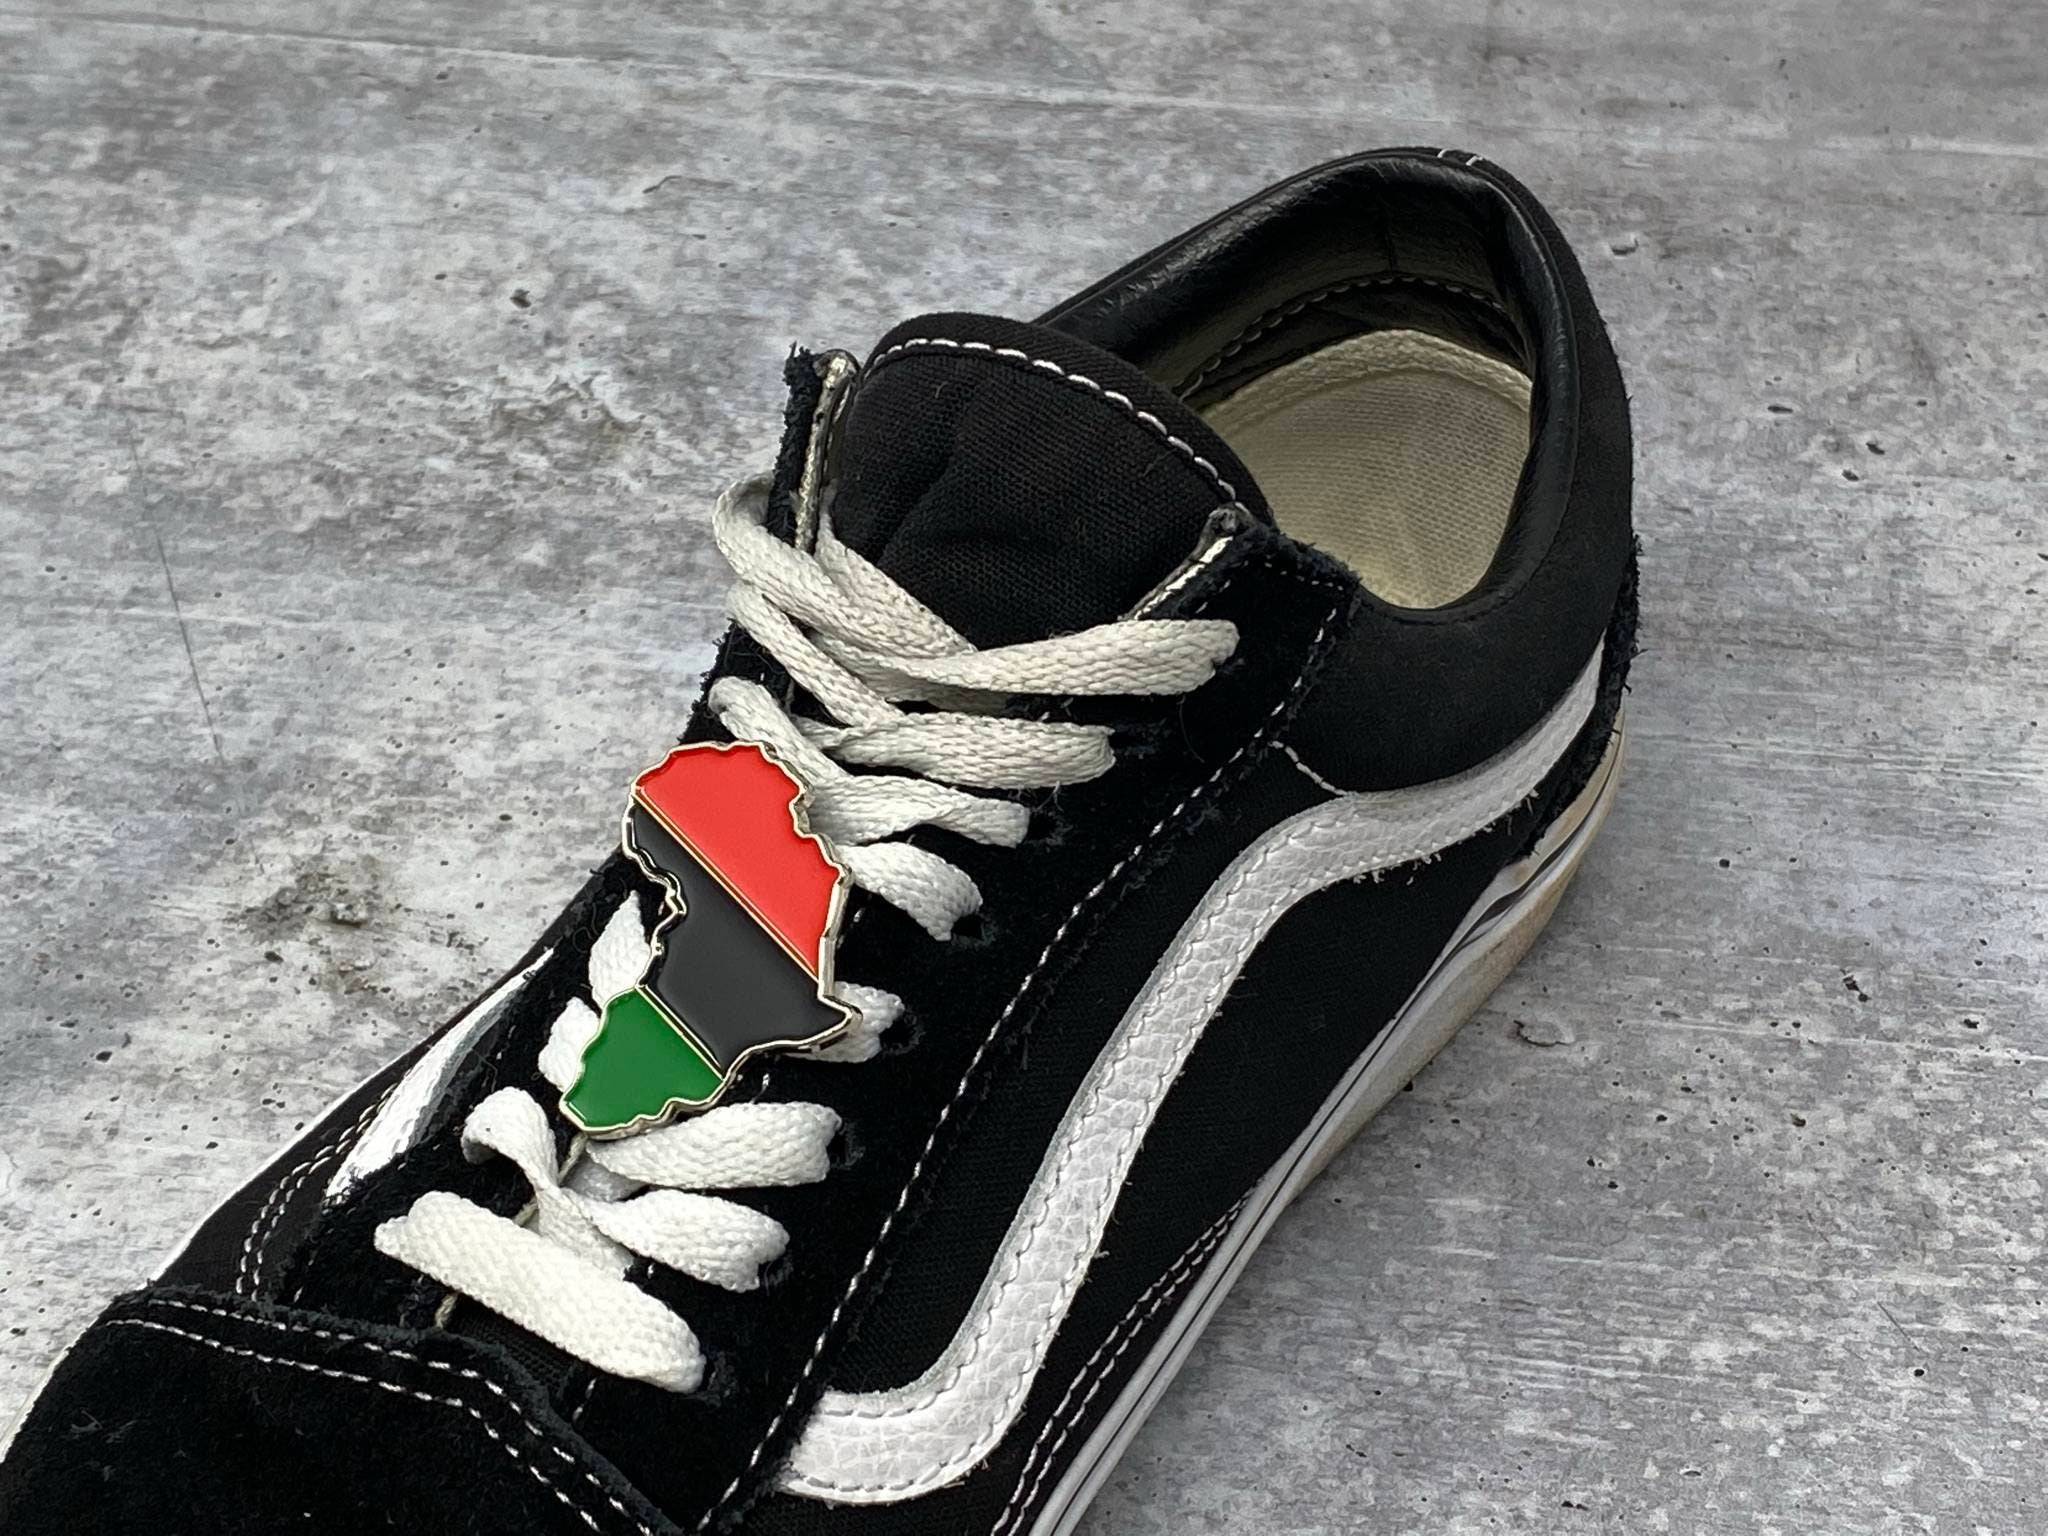 Cool "Pan-African Flag" 1-pc/ Shoelace Charm, Soft Enamel Skate Charm, Size 2",  Designer Charms For Shoes and Skates, RGB Flag Charms